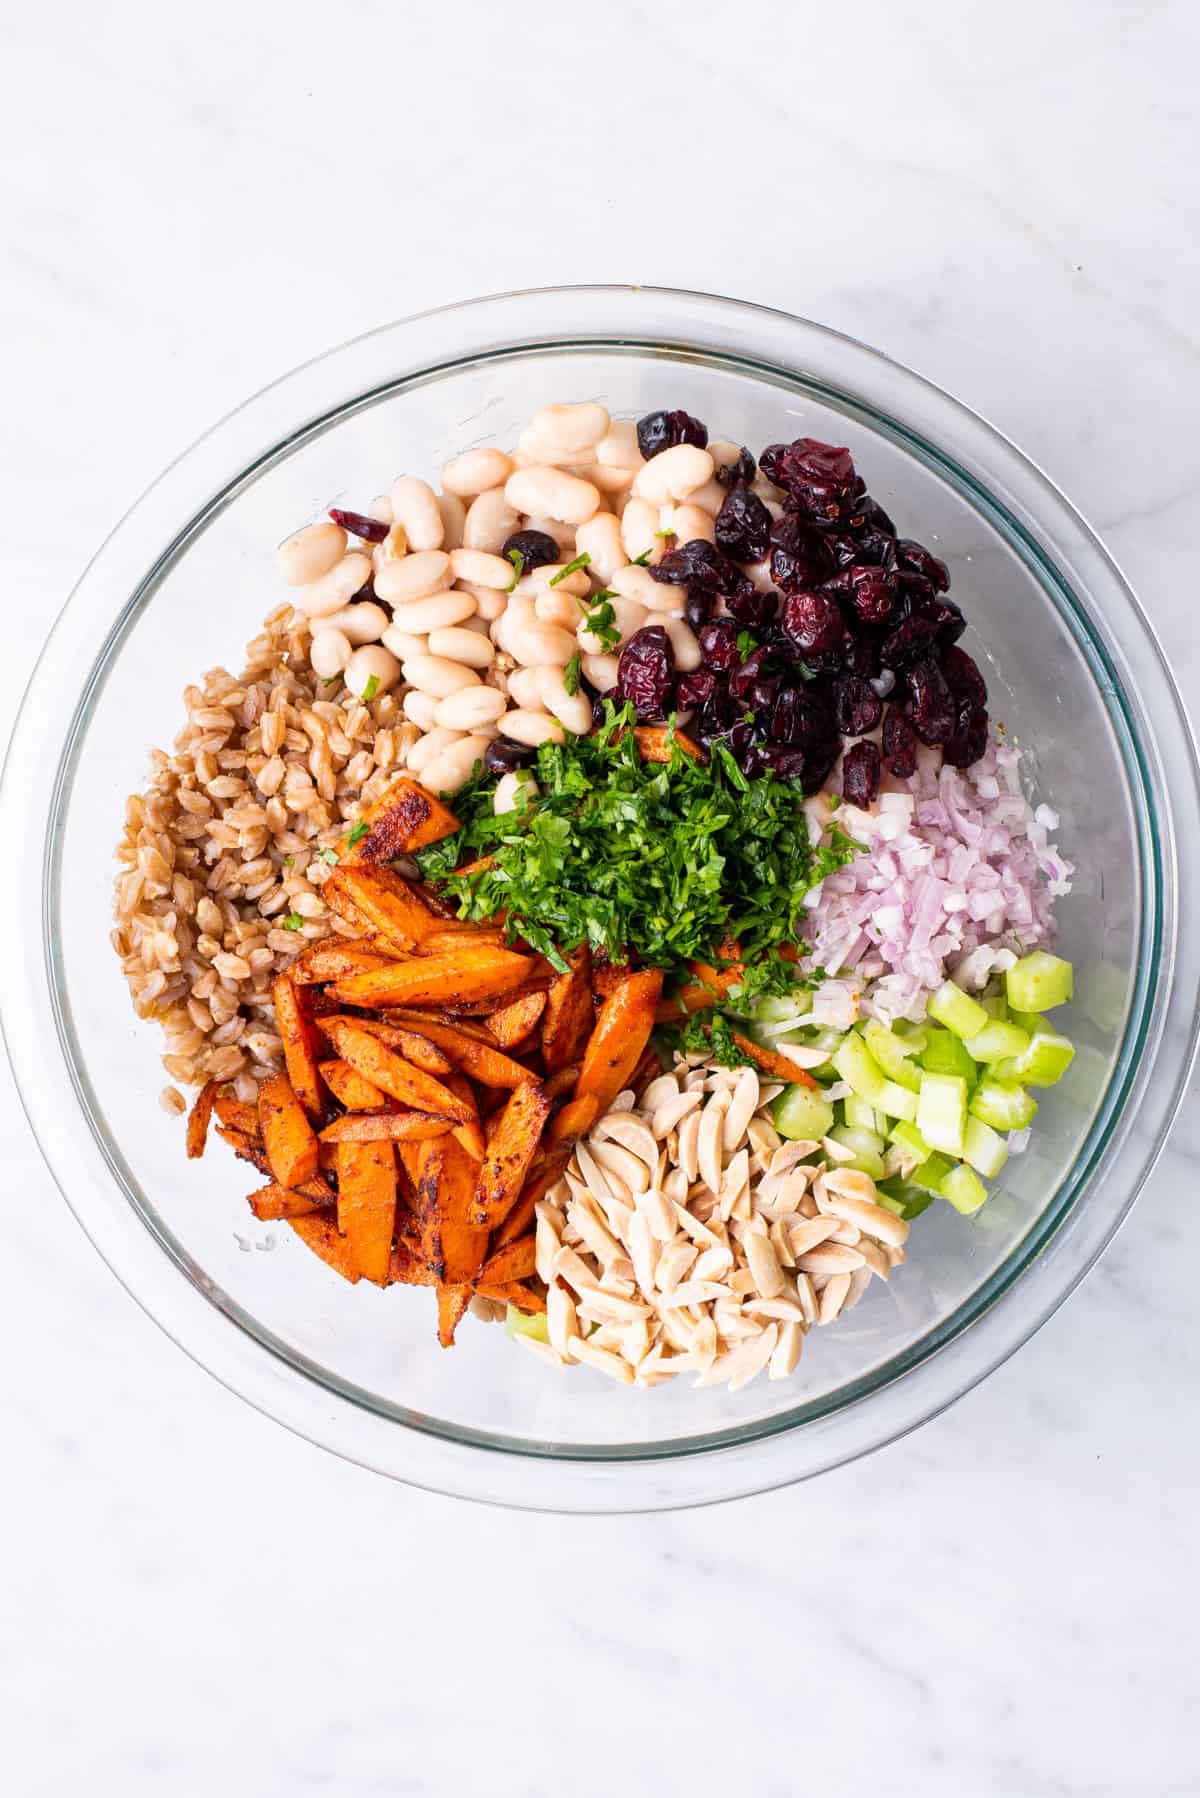 Farro, sauteed carrots, white beans, dried cranberries, celery, shallot, and parsley in a glass bowl.